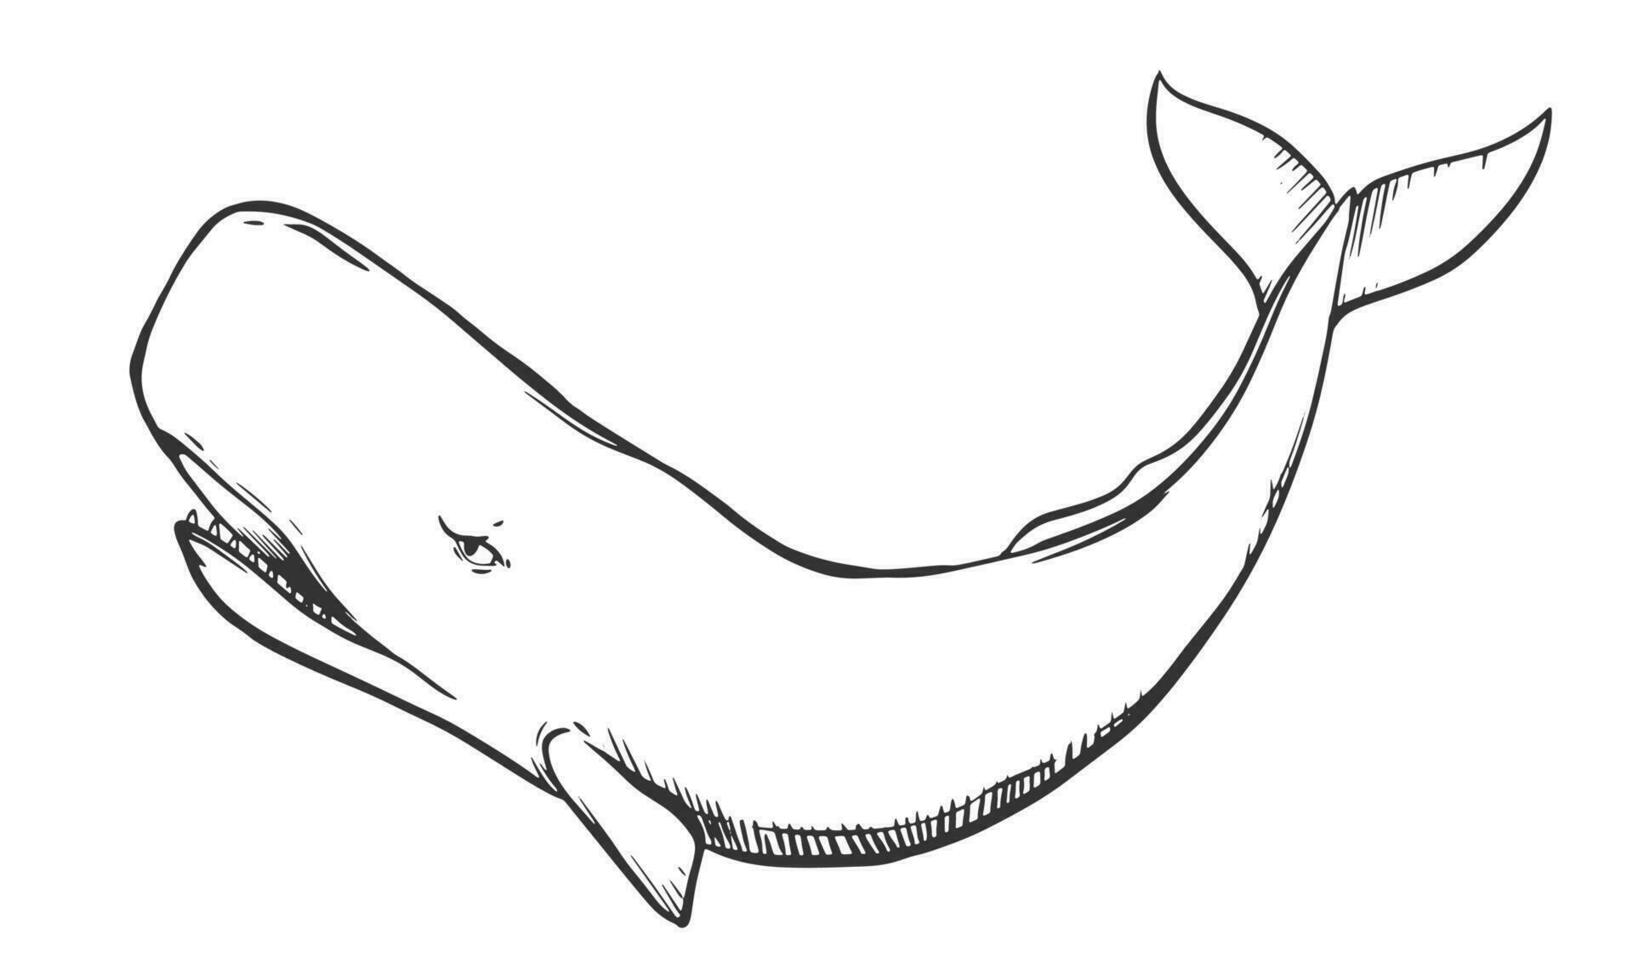 Vector drawing of a sperm whale. White whale in engraving style. Illustration for a logo, tattoo in a marine style. Predatory inhabitant of the ocean.